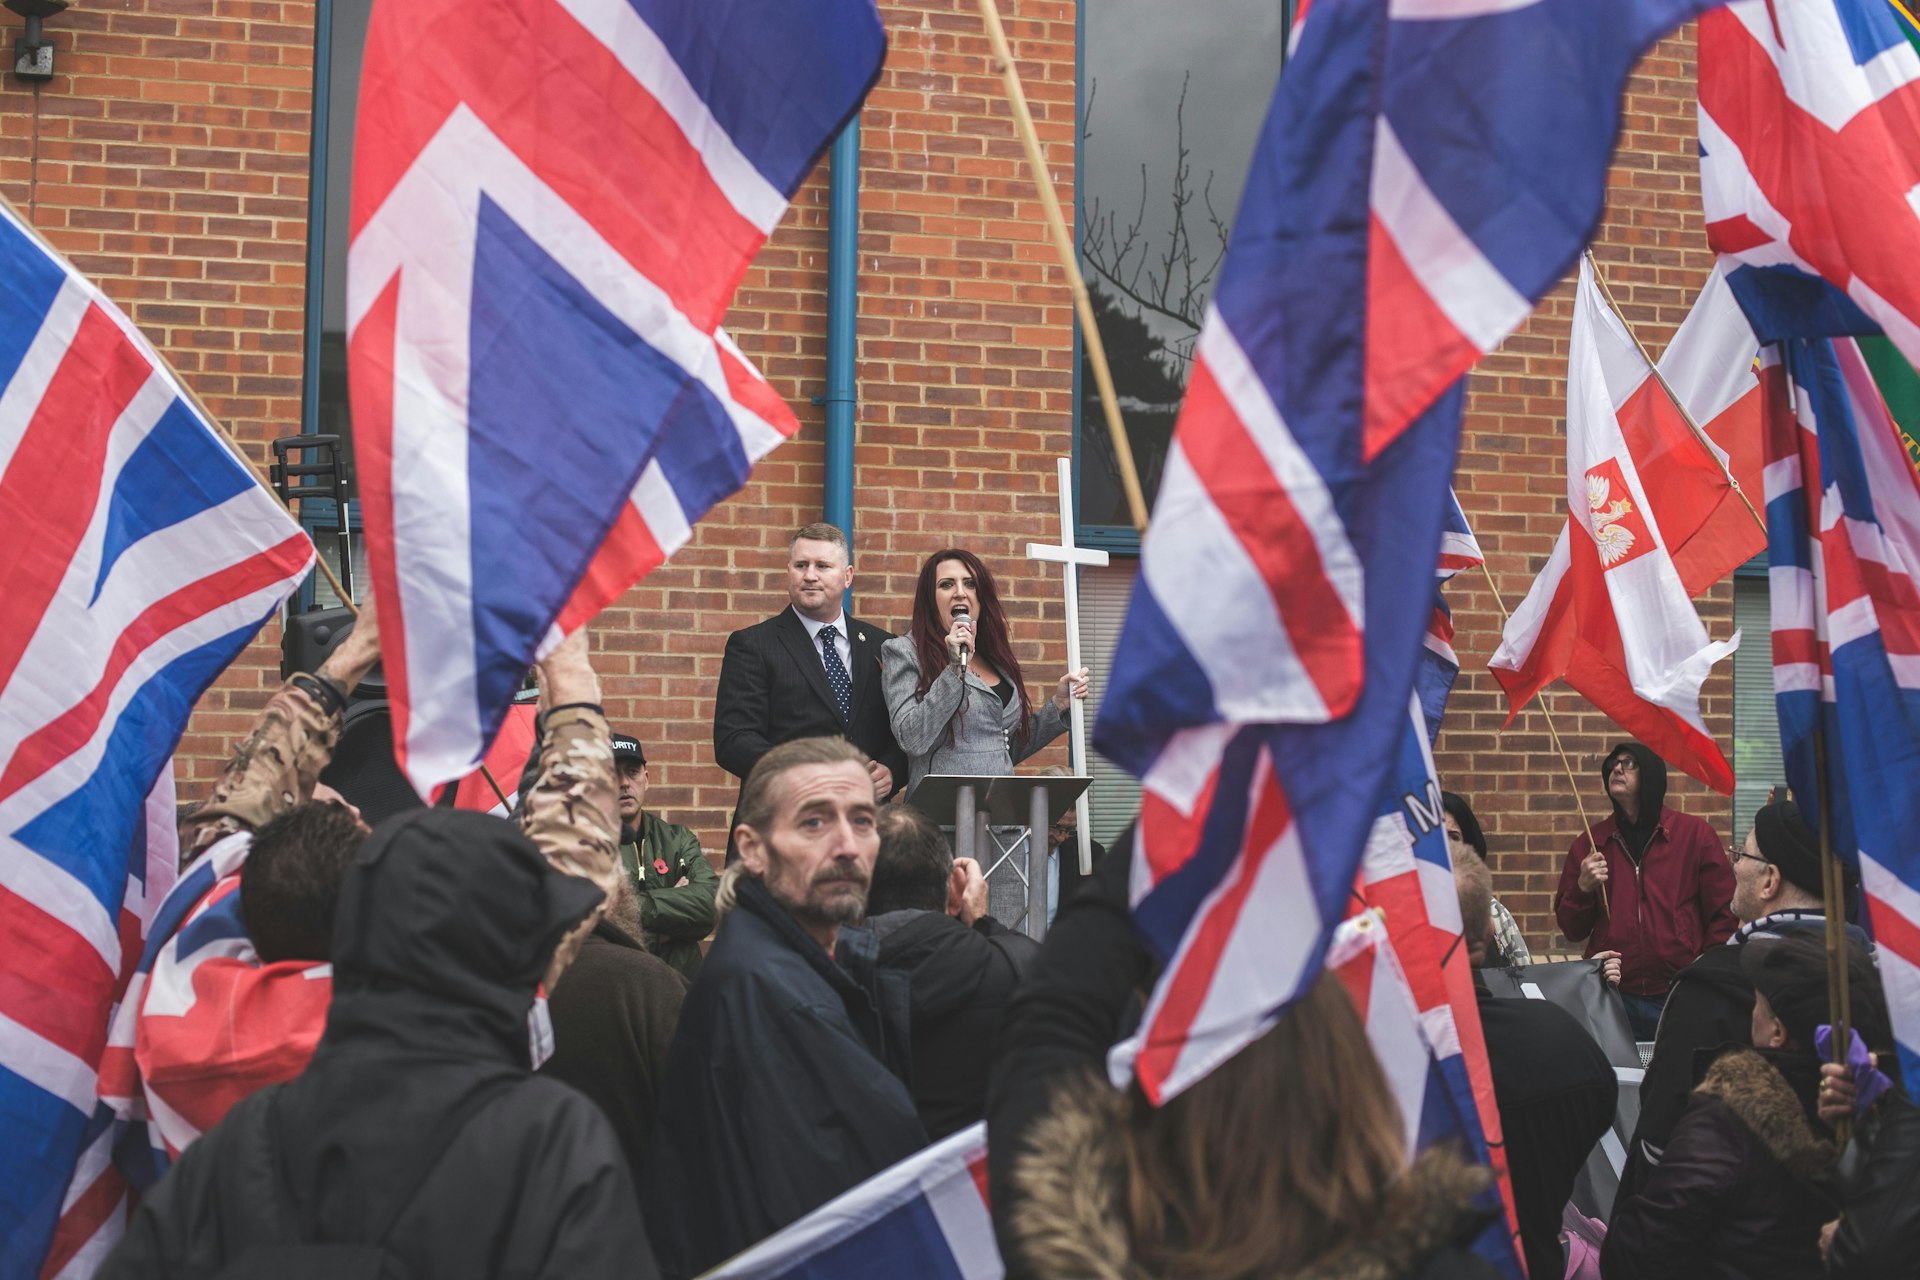 British racists held another miserable rally this weekend